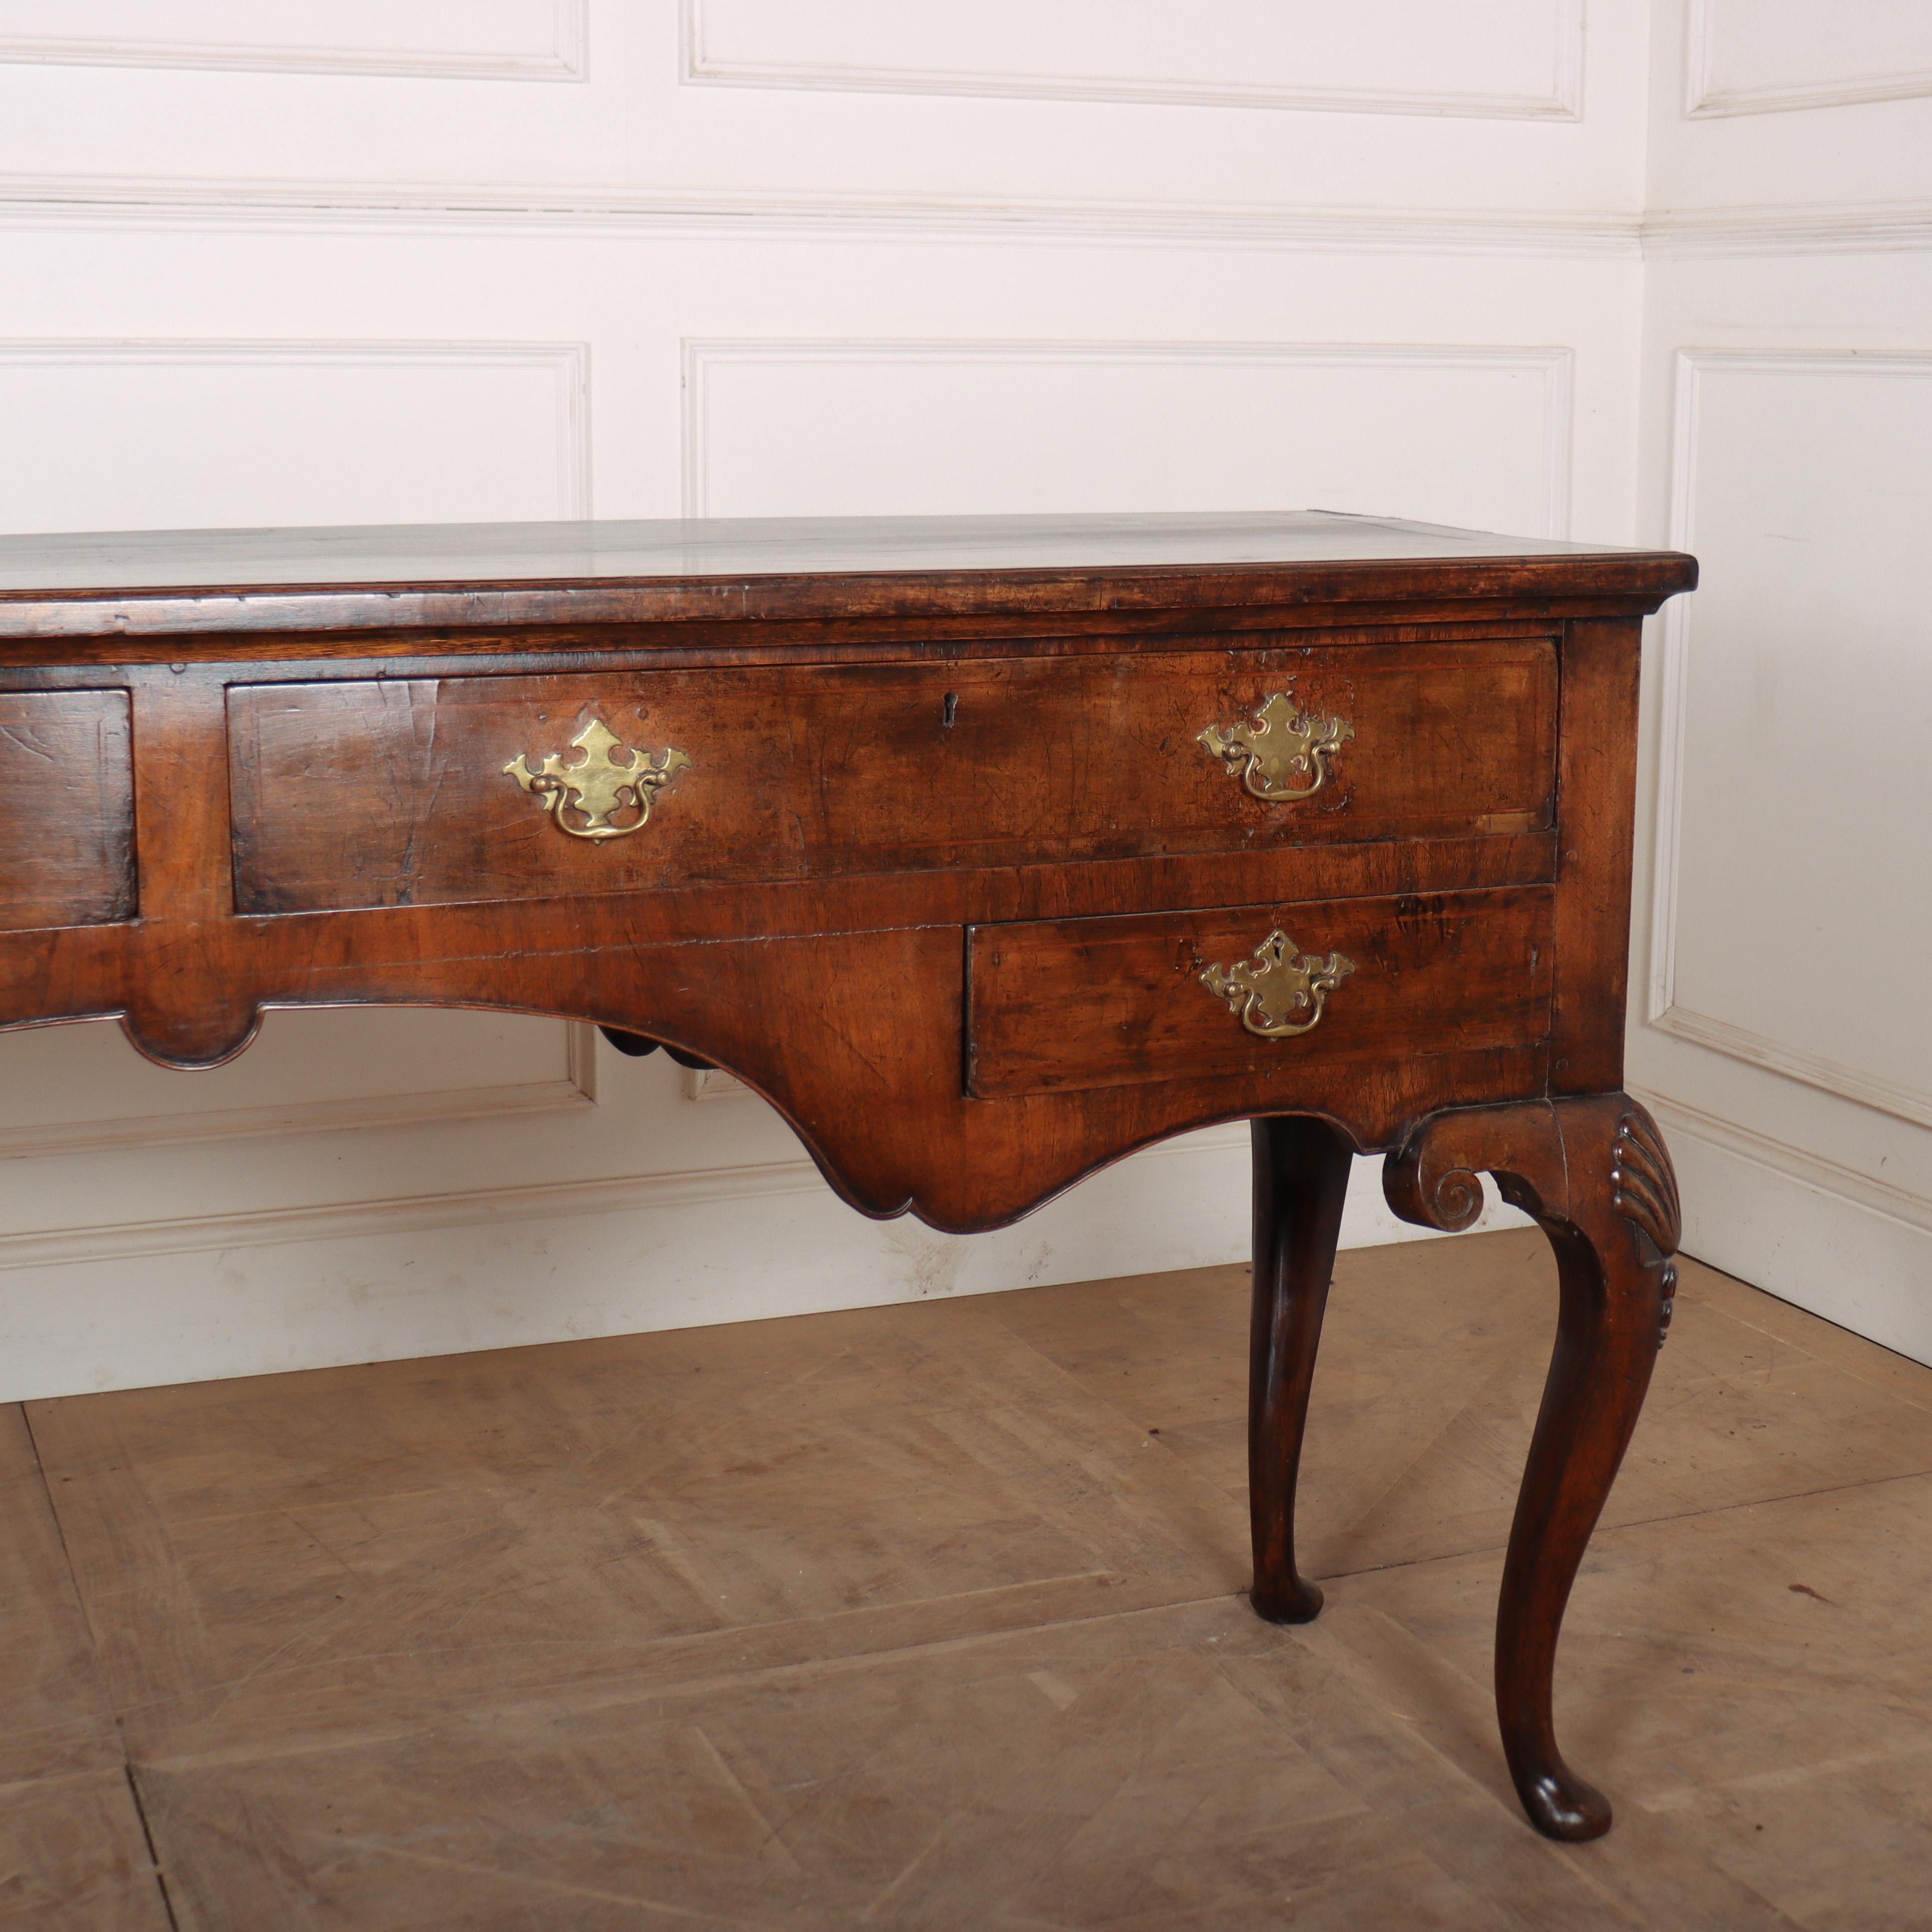 Wonderful 18th C English walnut cabriole leg dresser base. 1780.

Reference: 8399

Dimensions
77 inches (196 cms) Wide
21 inches (53 cms) Deep
36 inches (91 cms) High